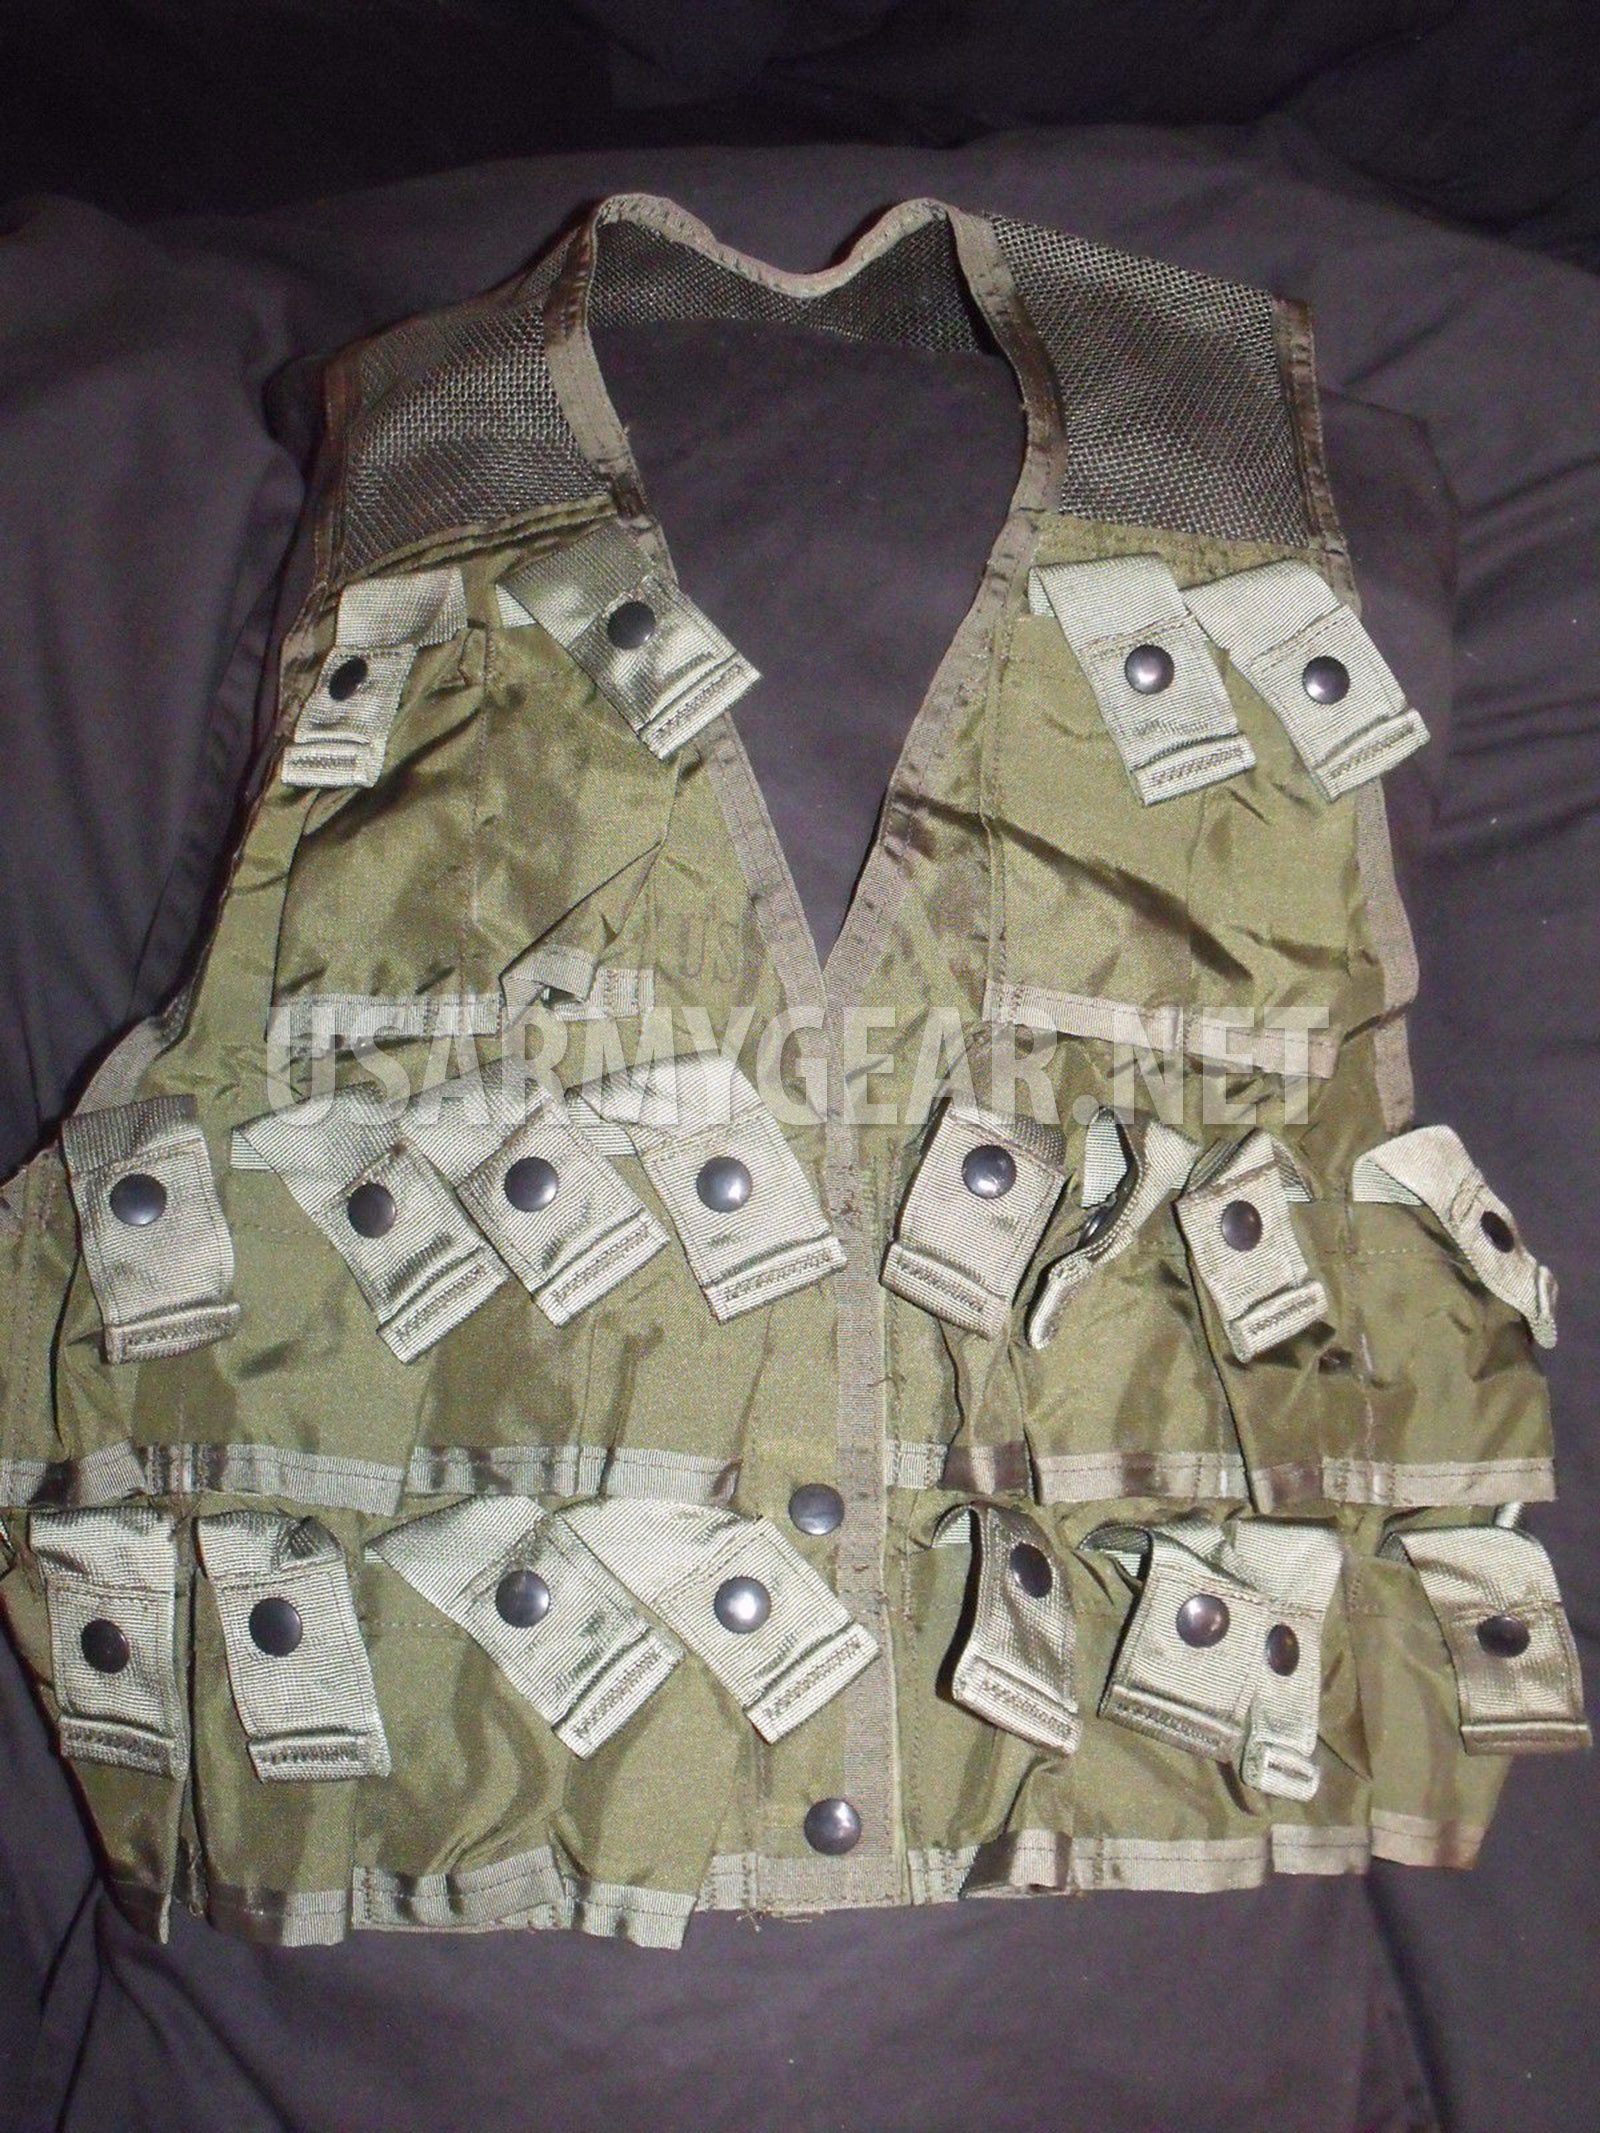 NEW Made in USA 24 pockets Ammunition Carrying Vest LARGE L ARMY,FLC,LBV,Hunter